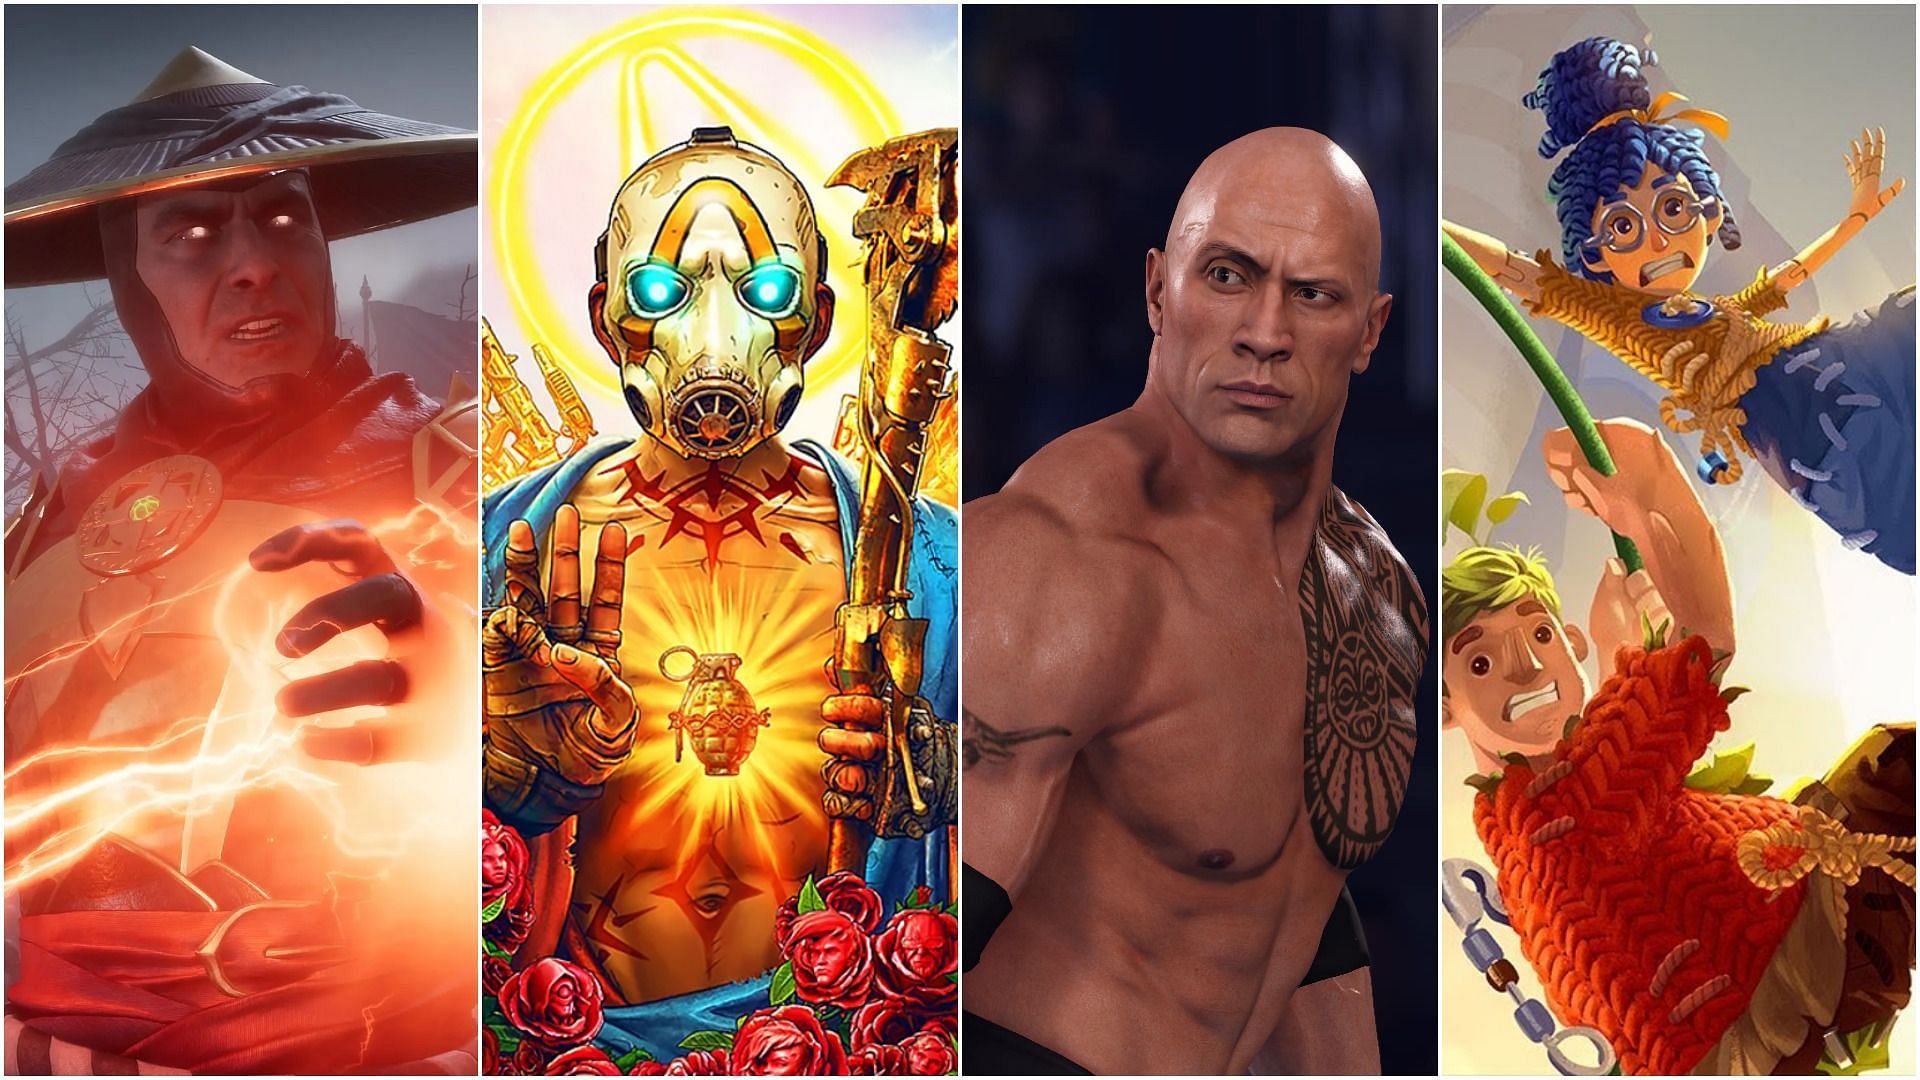 Best Cross-platform games to play this year 2022 - Ranked